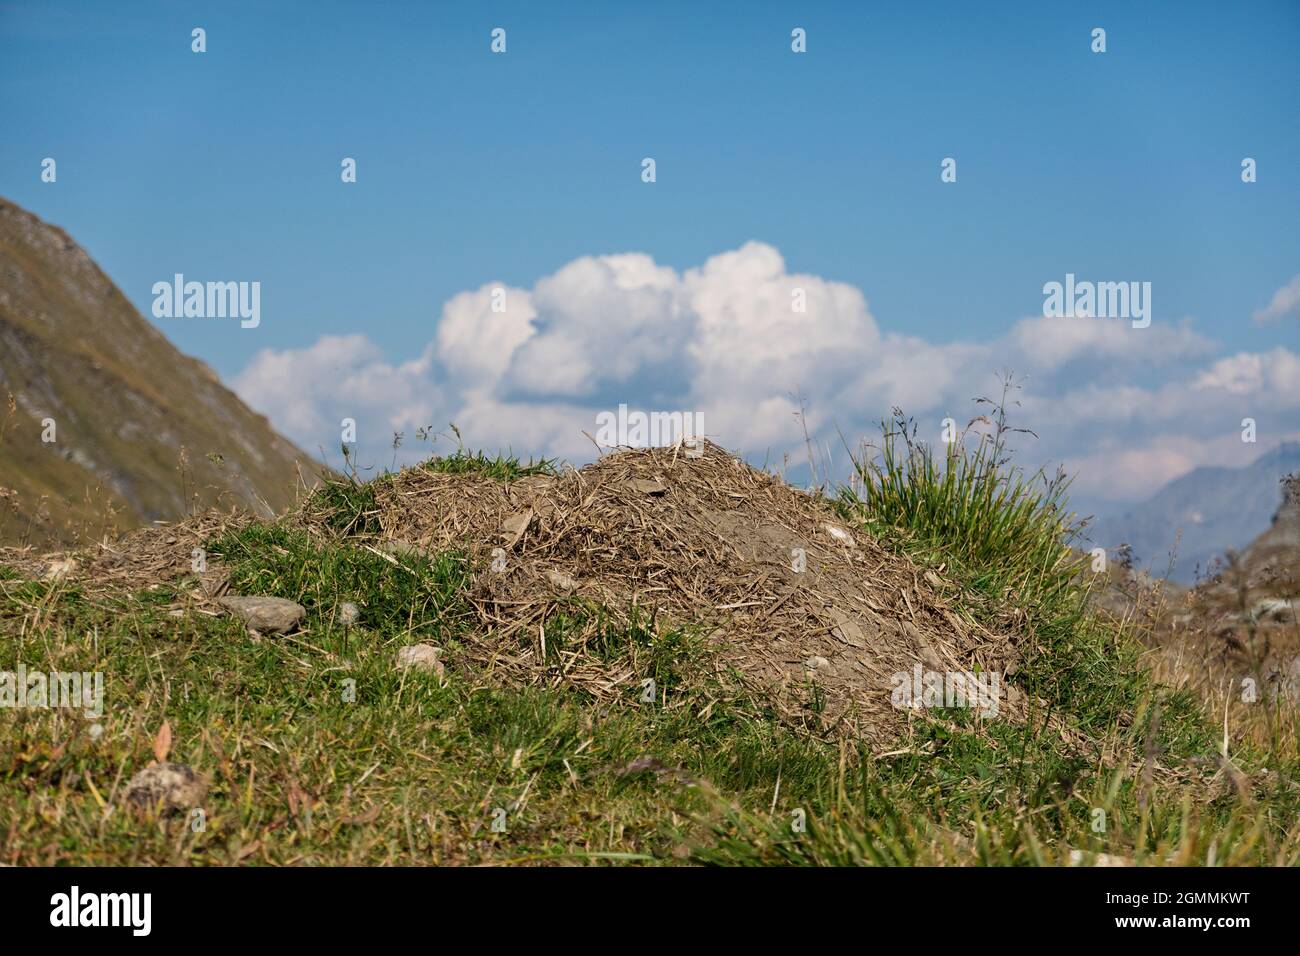 The burrow of an Alpine marmot, from which the resident has removed the old nesting material, under a blue sky Stock Photo